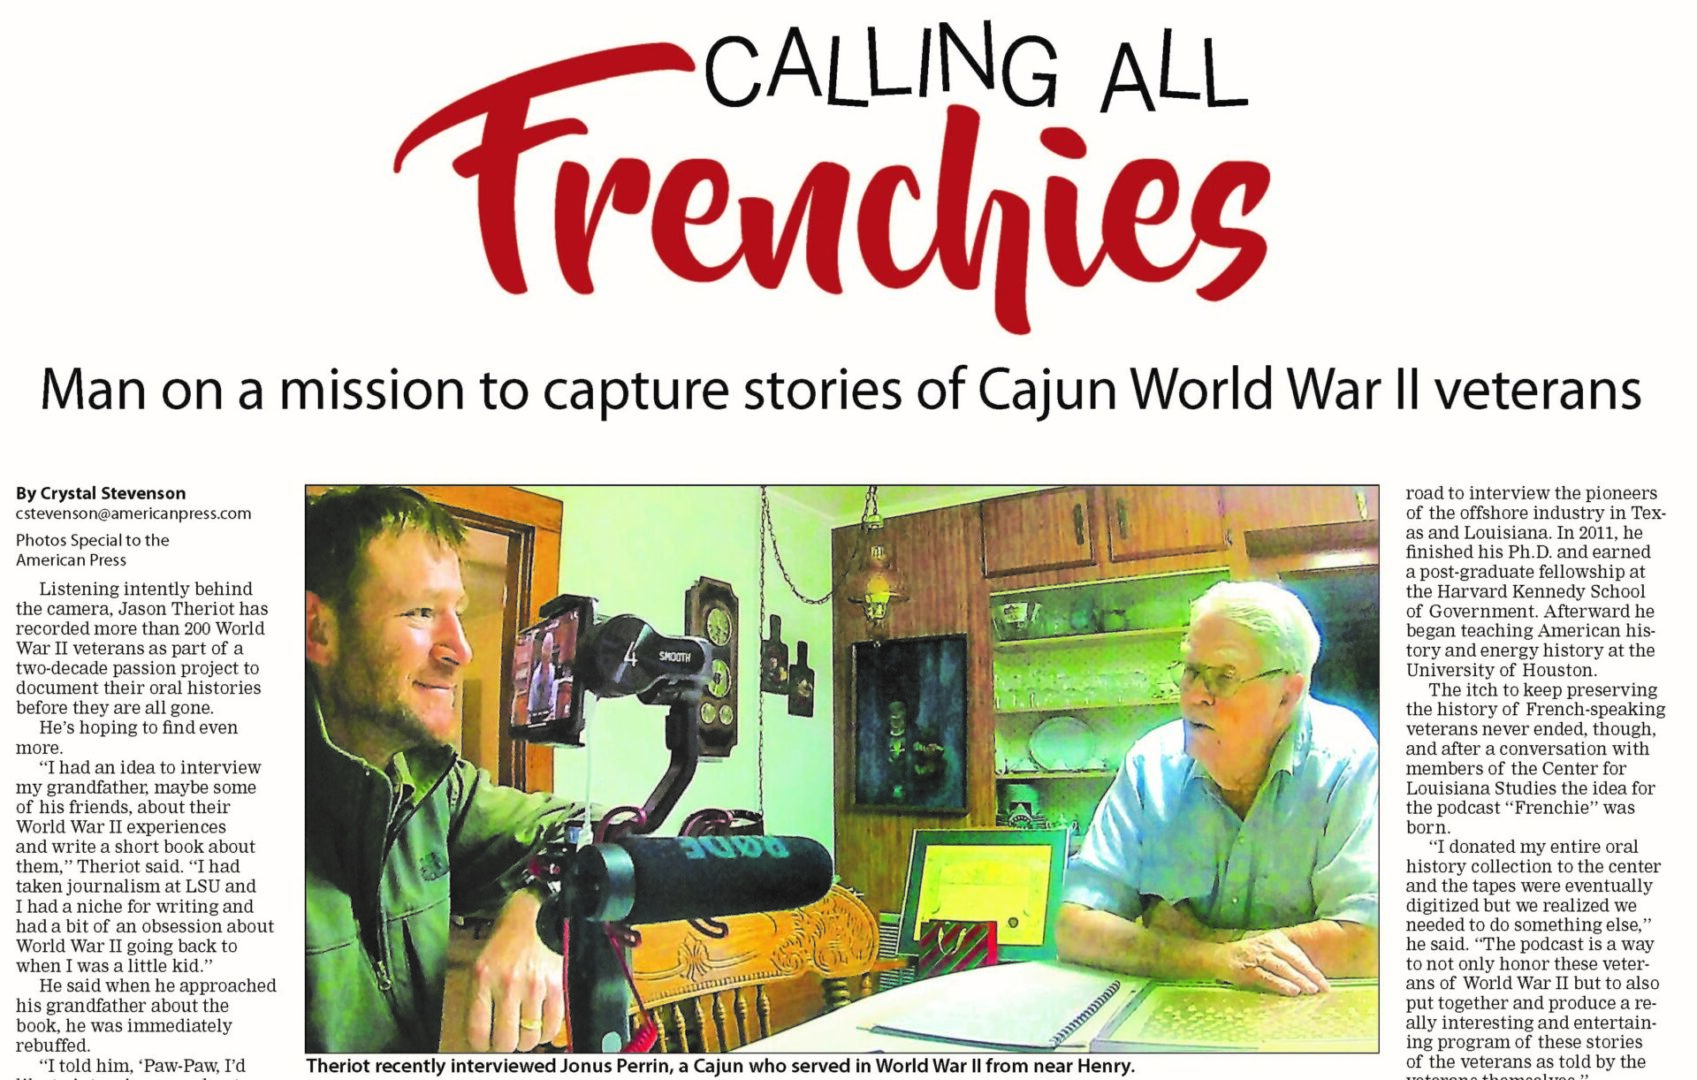 Man on a mission to capture stories of Cajun World War II veterans